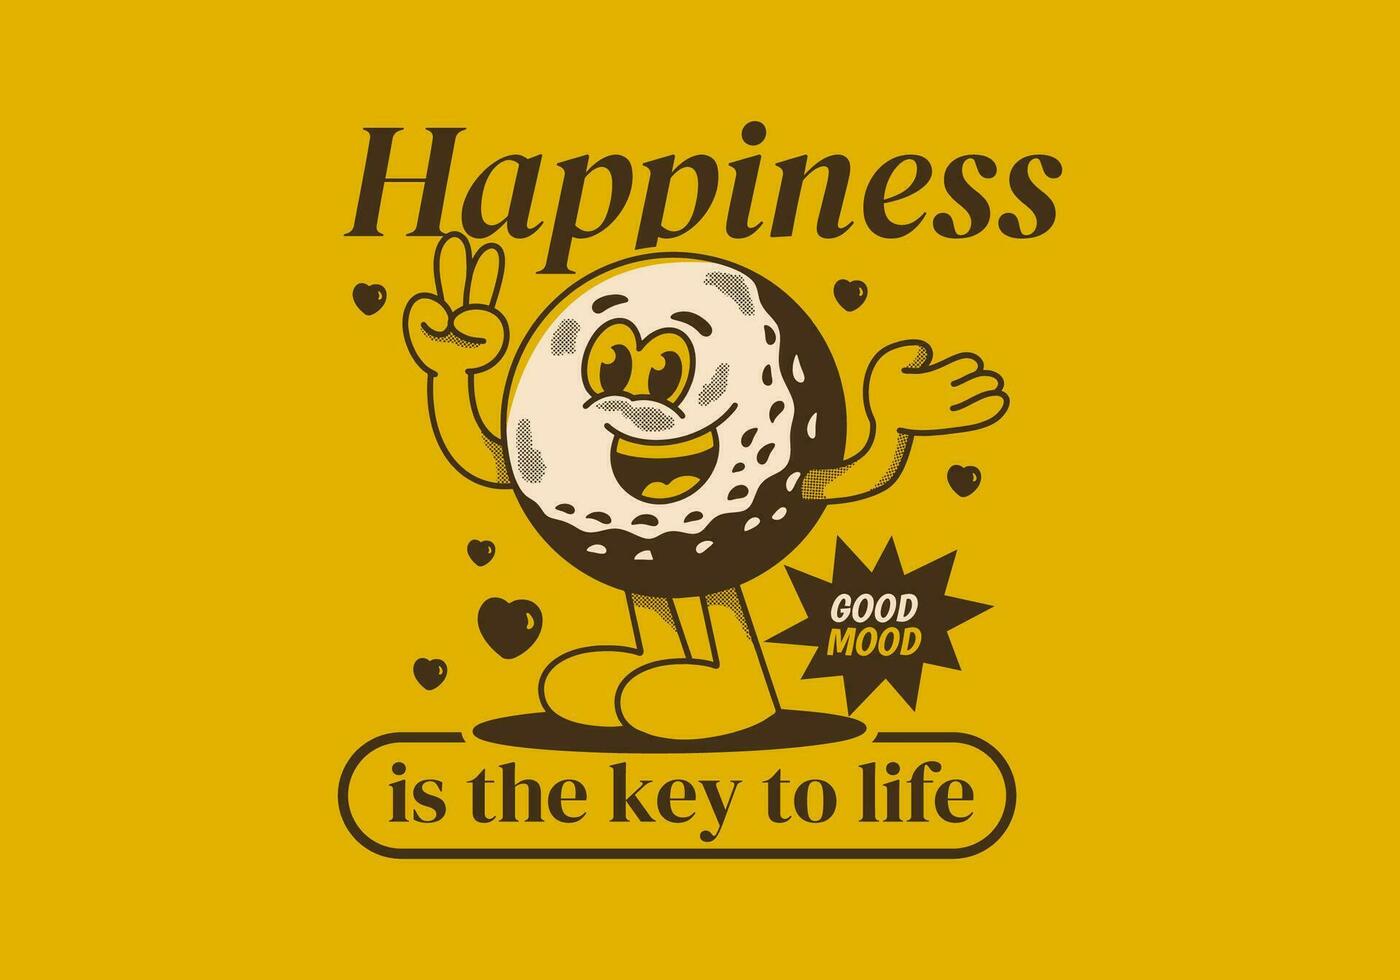 Happiness is the key to life. Mascot character illustration of golf ball with happy face vector